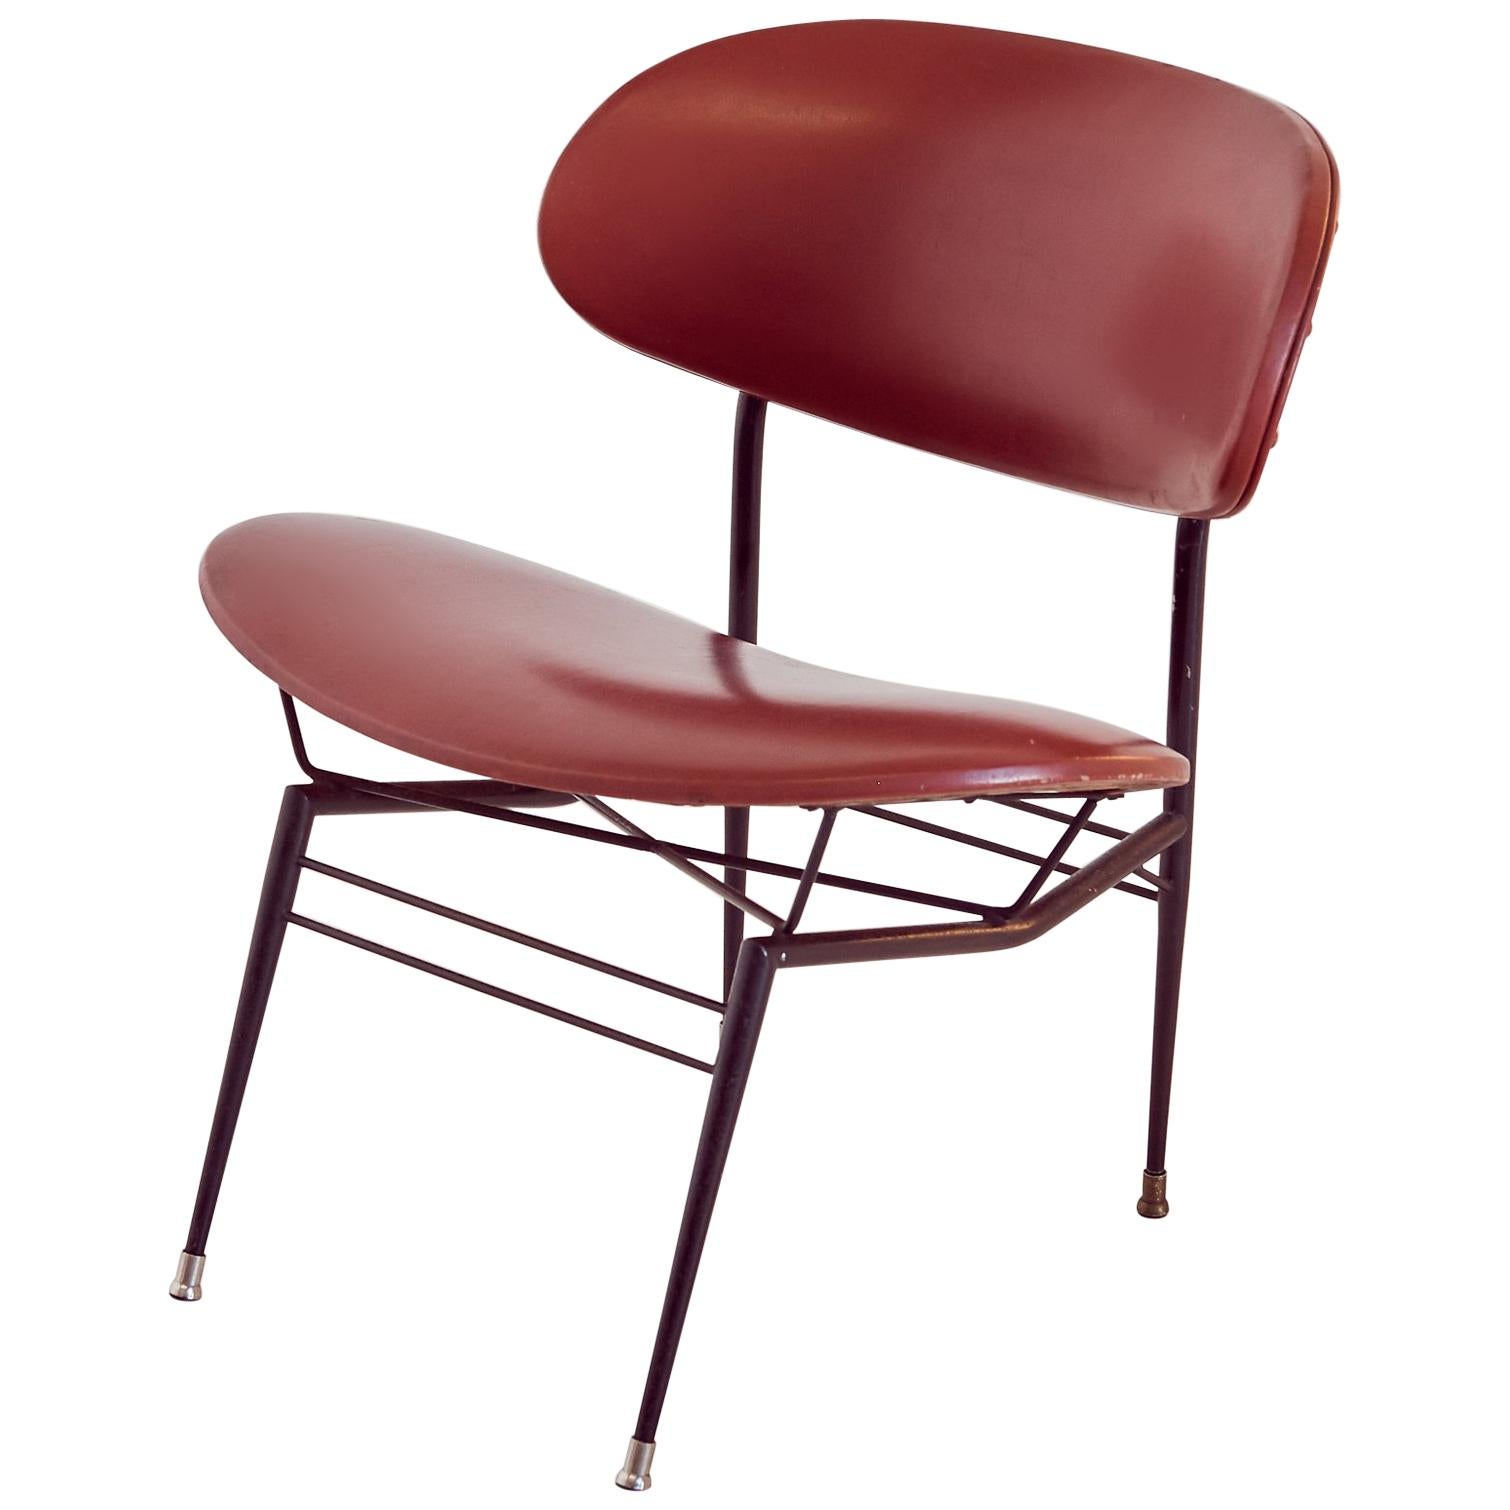 Two Italian Chairs in Red Faux Leather, 1950s